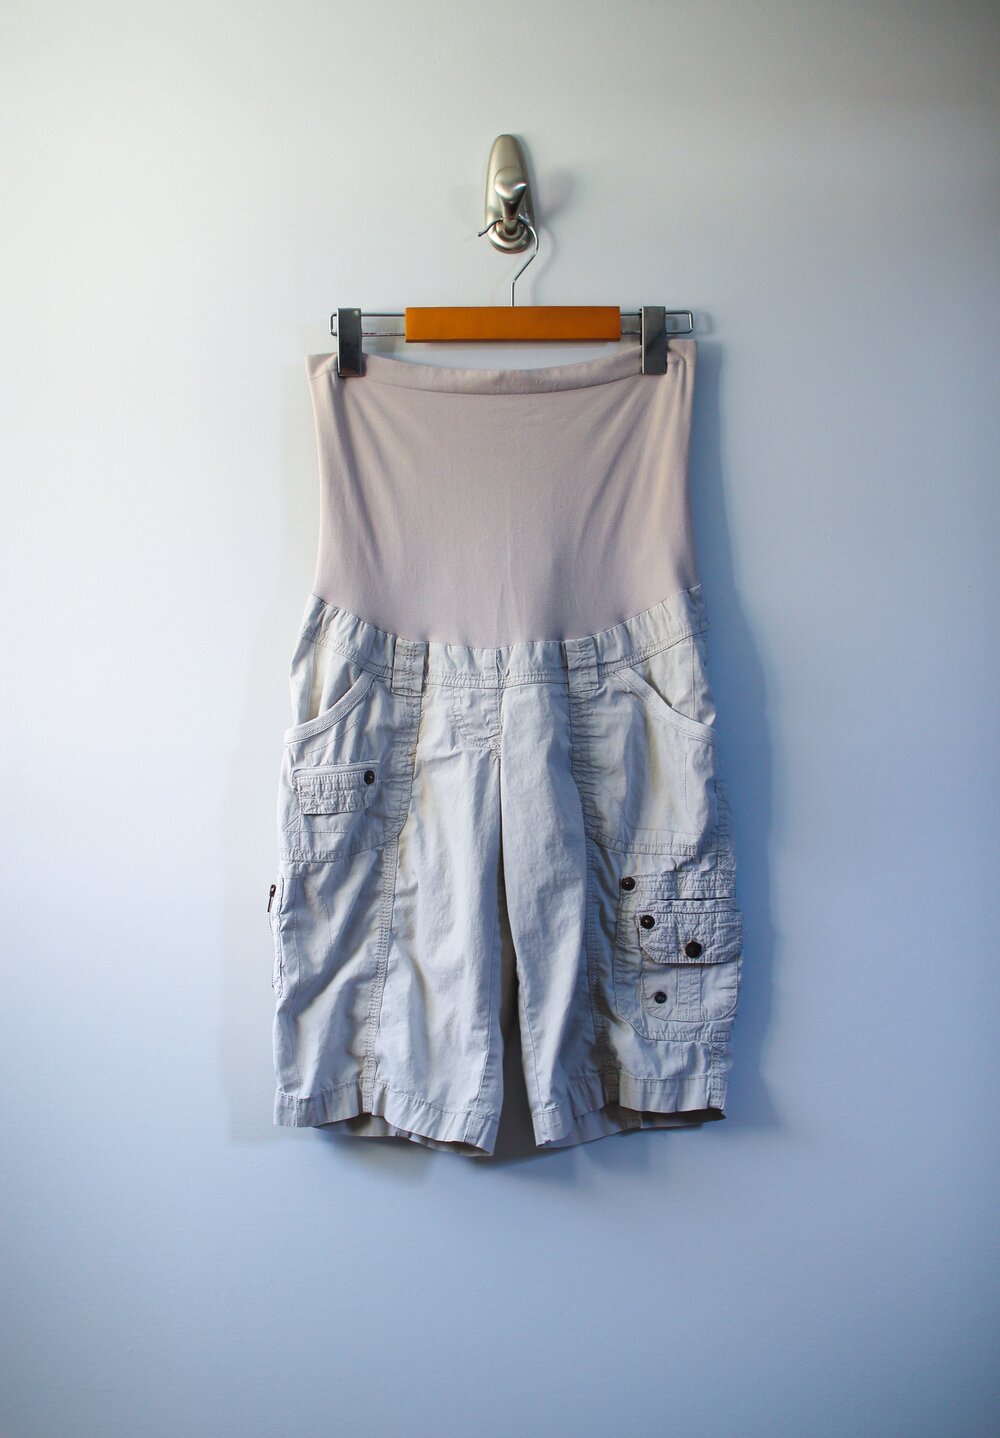 Motherhood Maternity cargo shorts in size Small — Struck by Secondhand